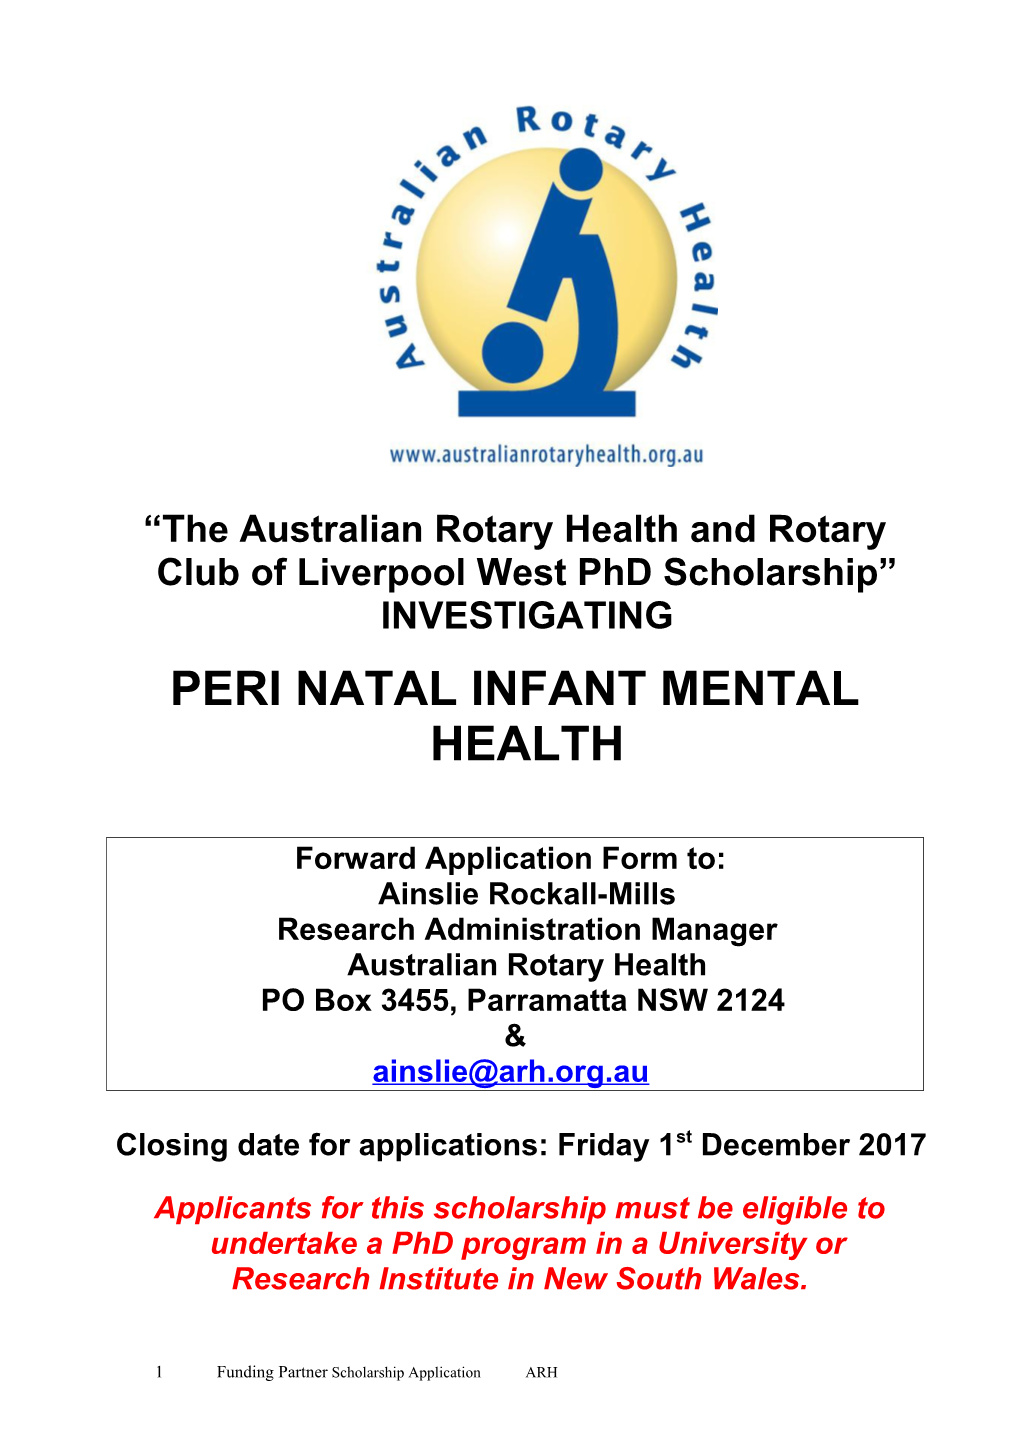 The Australian Rotary Health and Rotary Club of Liverpool West Phd Scholarship INVESTIGATING